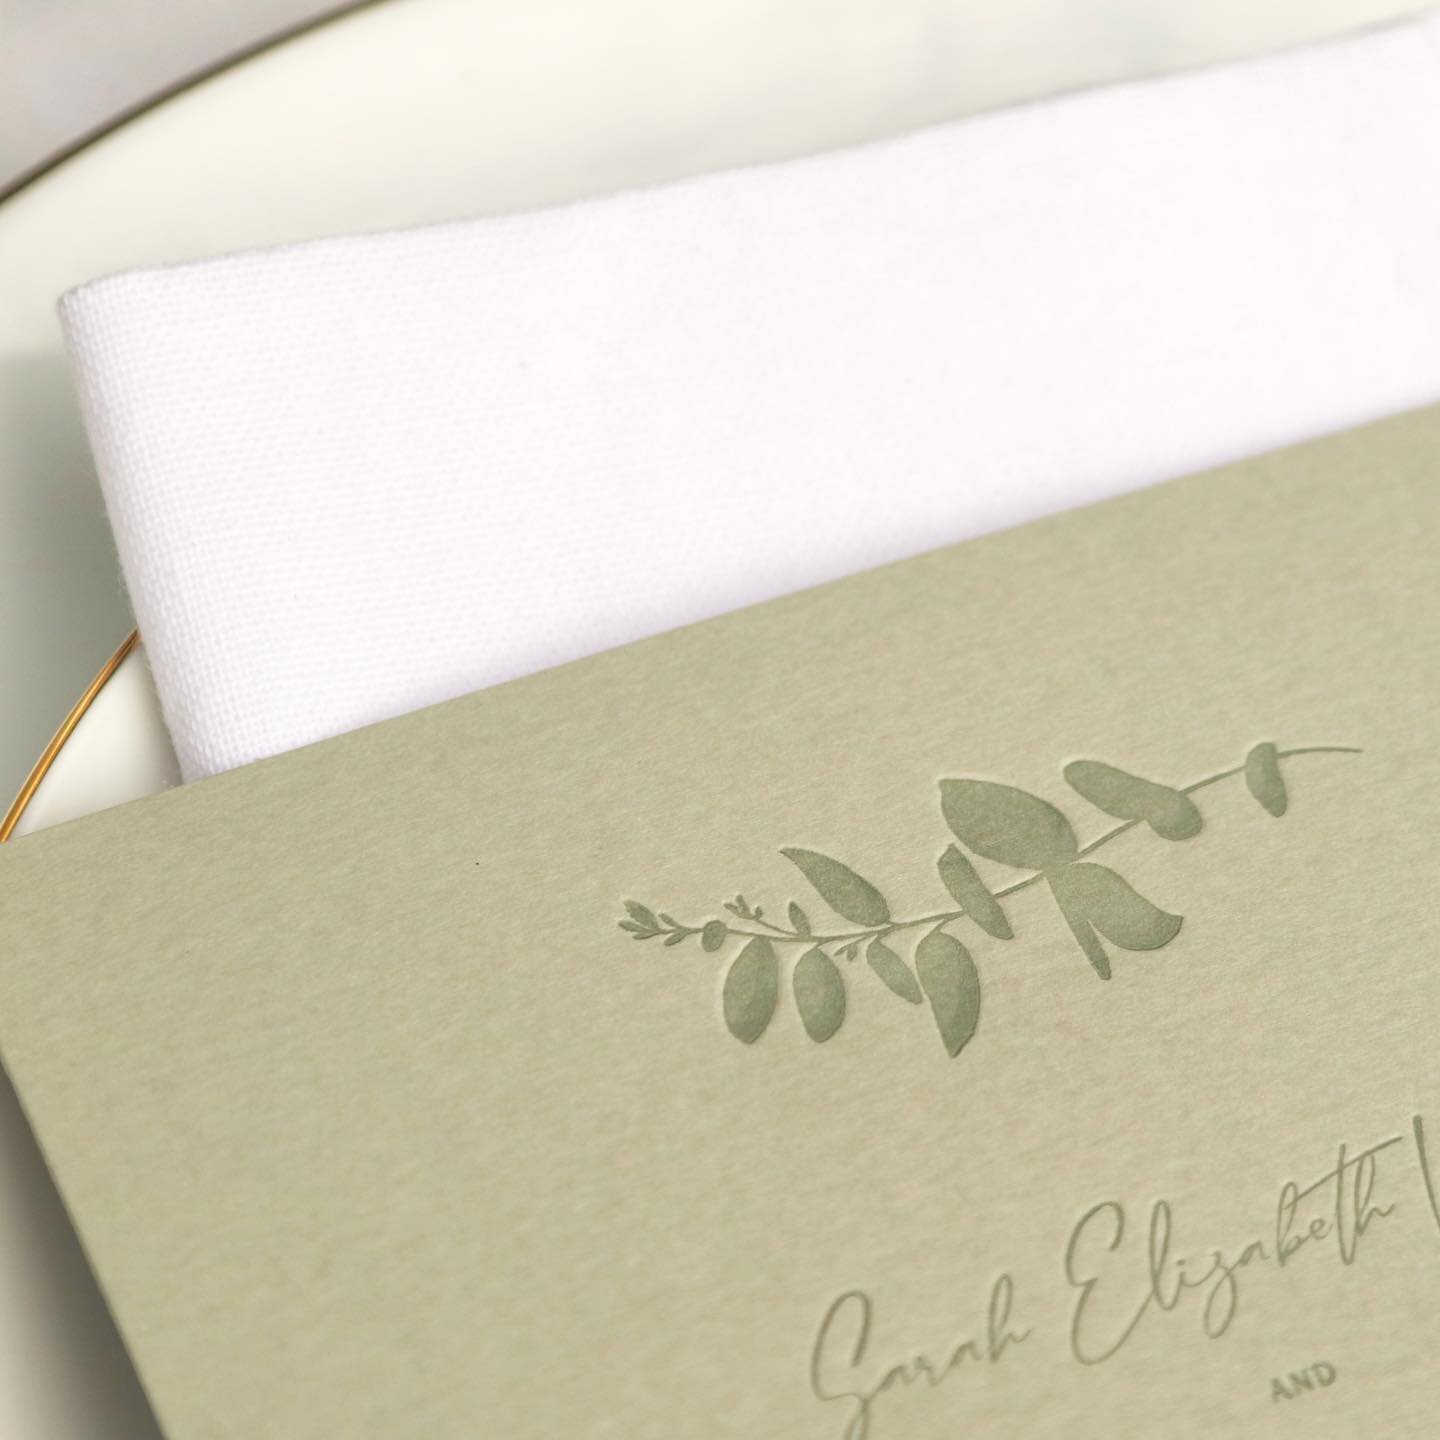 Eucalyptus sprigs printed onto a green card stock with green inks for an earthy outdoor wedding feel.

#eucalyptus #eucalyptuswedding #eucalyptusweddinginvitation #weddinginvites #weddinginvitations #greenwedding #greenweddings #ecowedding #weddingst